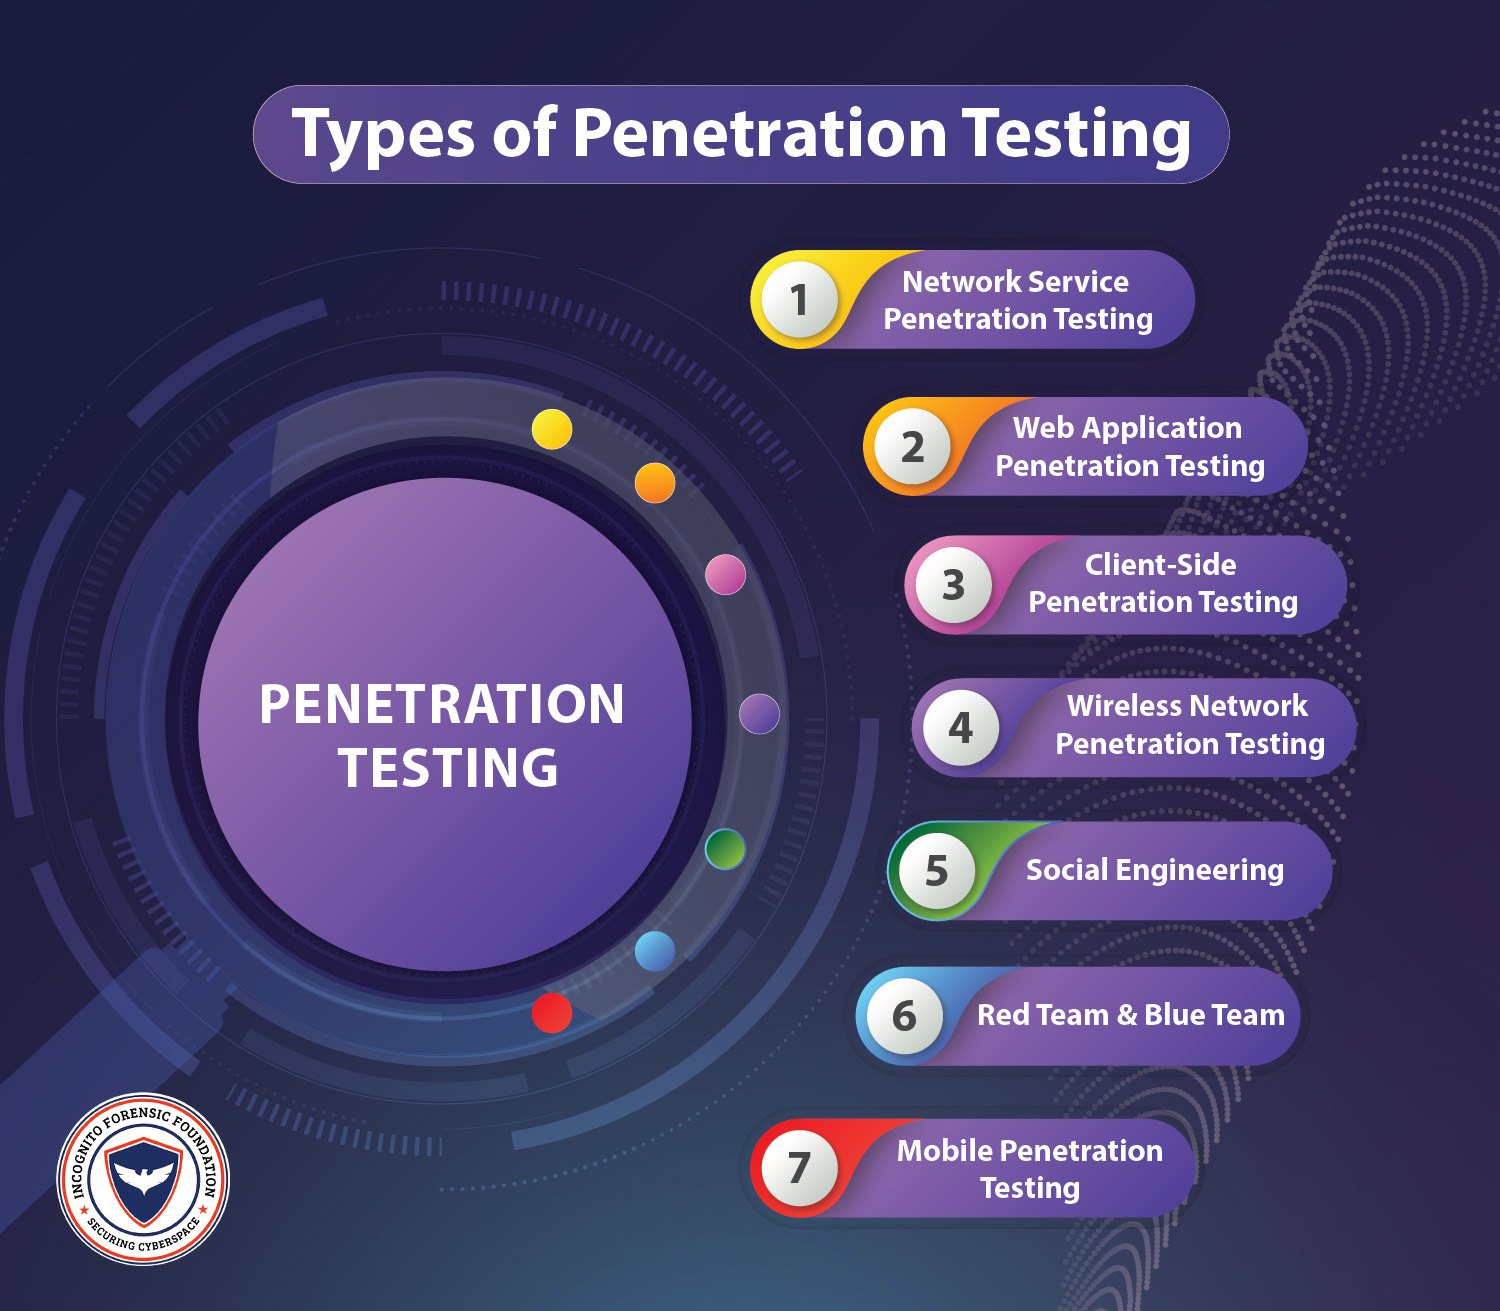 Types of Penetration Testing used by CyberSecurity professionals